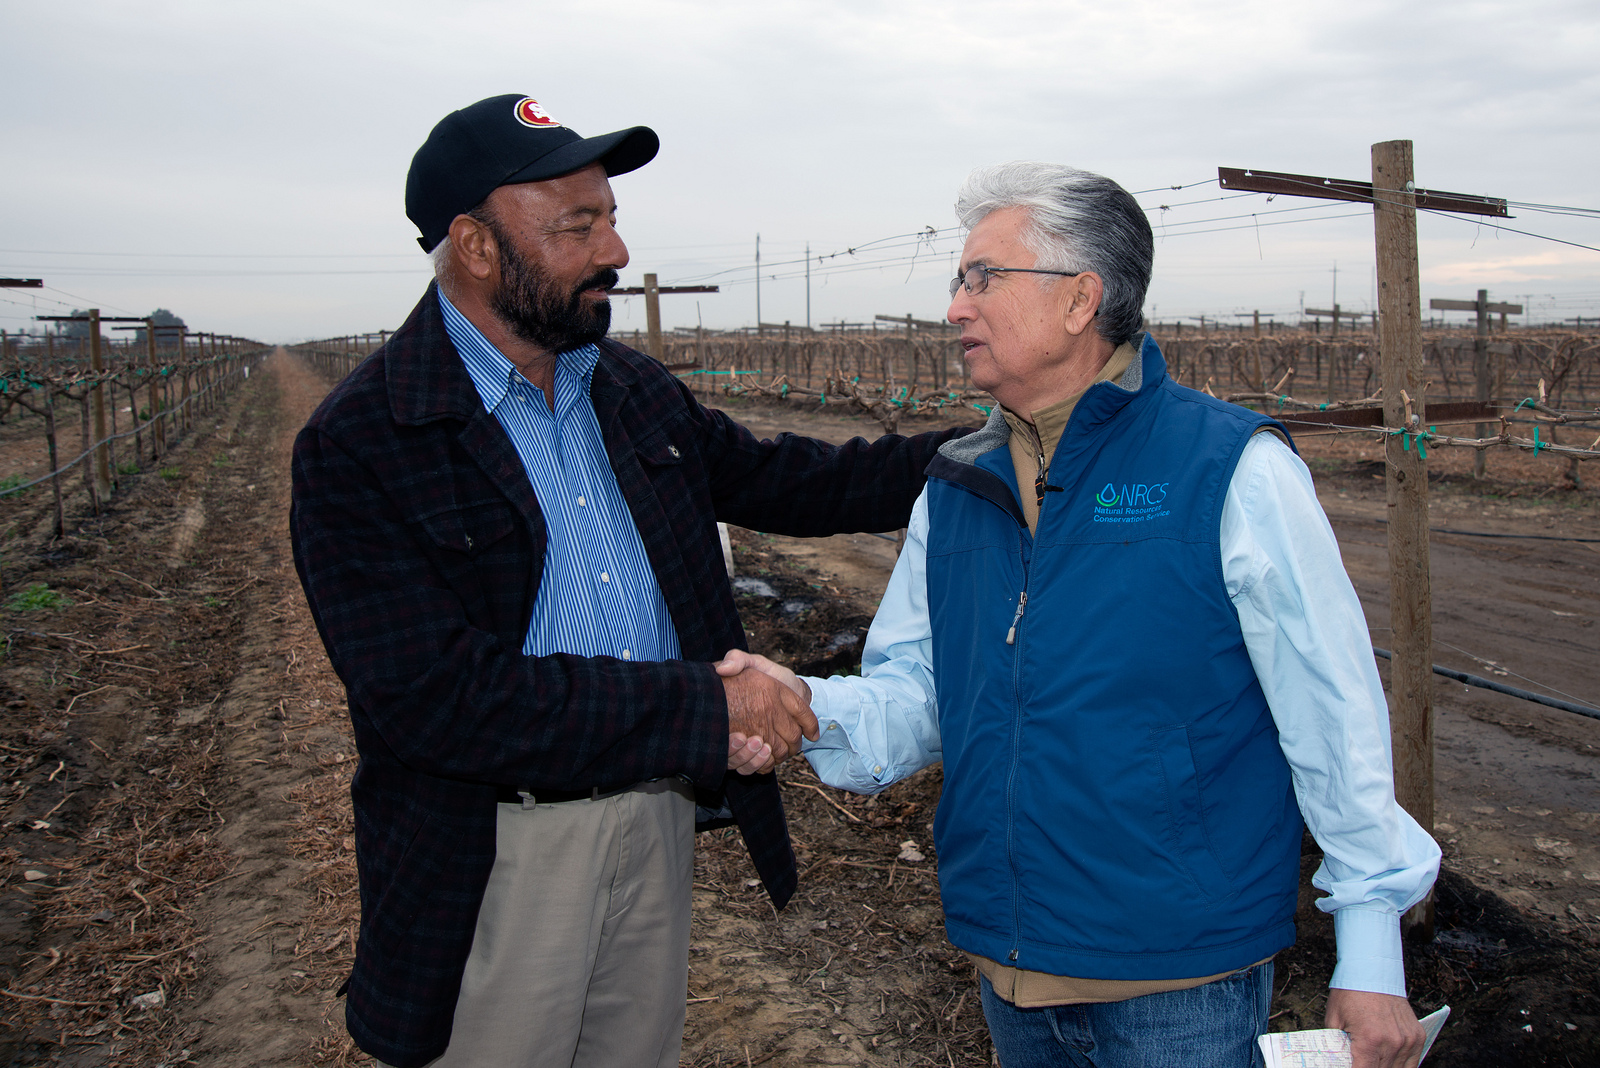 A farmer shakes hands with a USDA Natural Resources Conservation Service (NRCS) employee